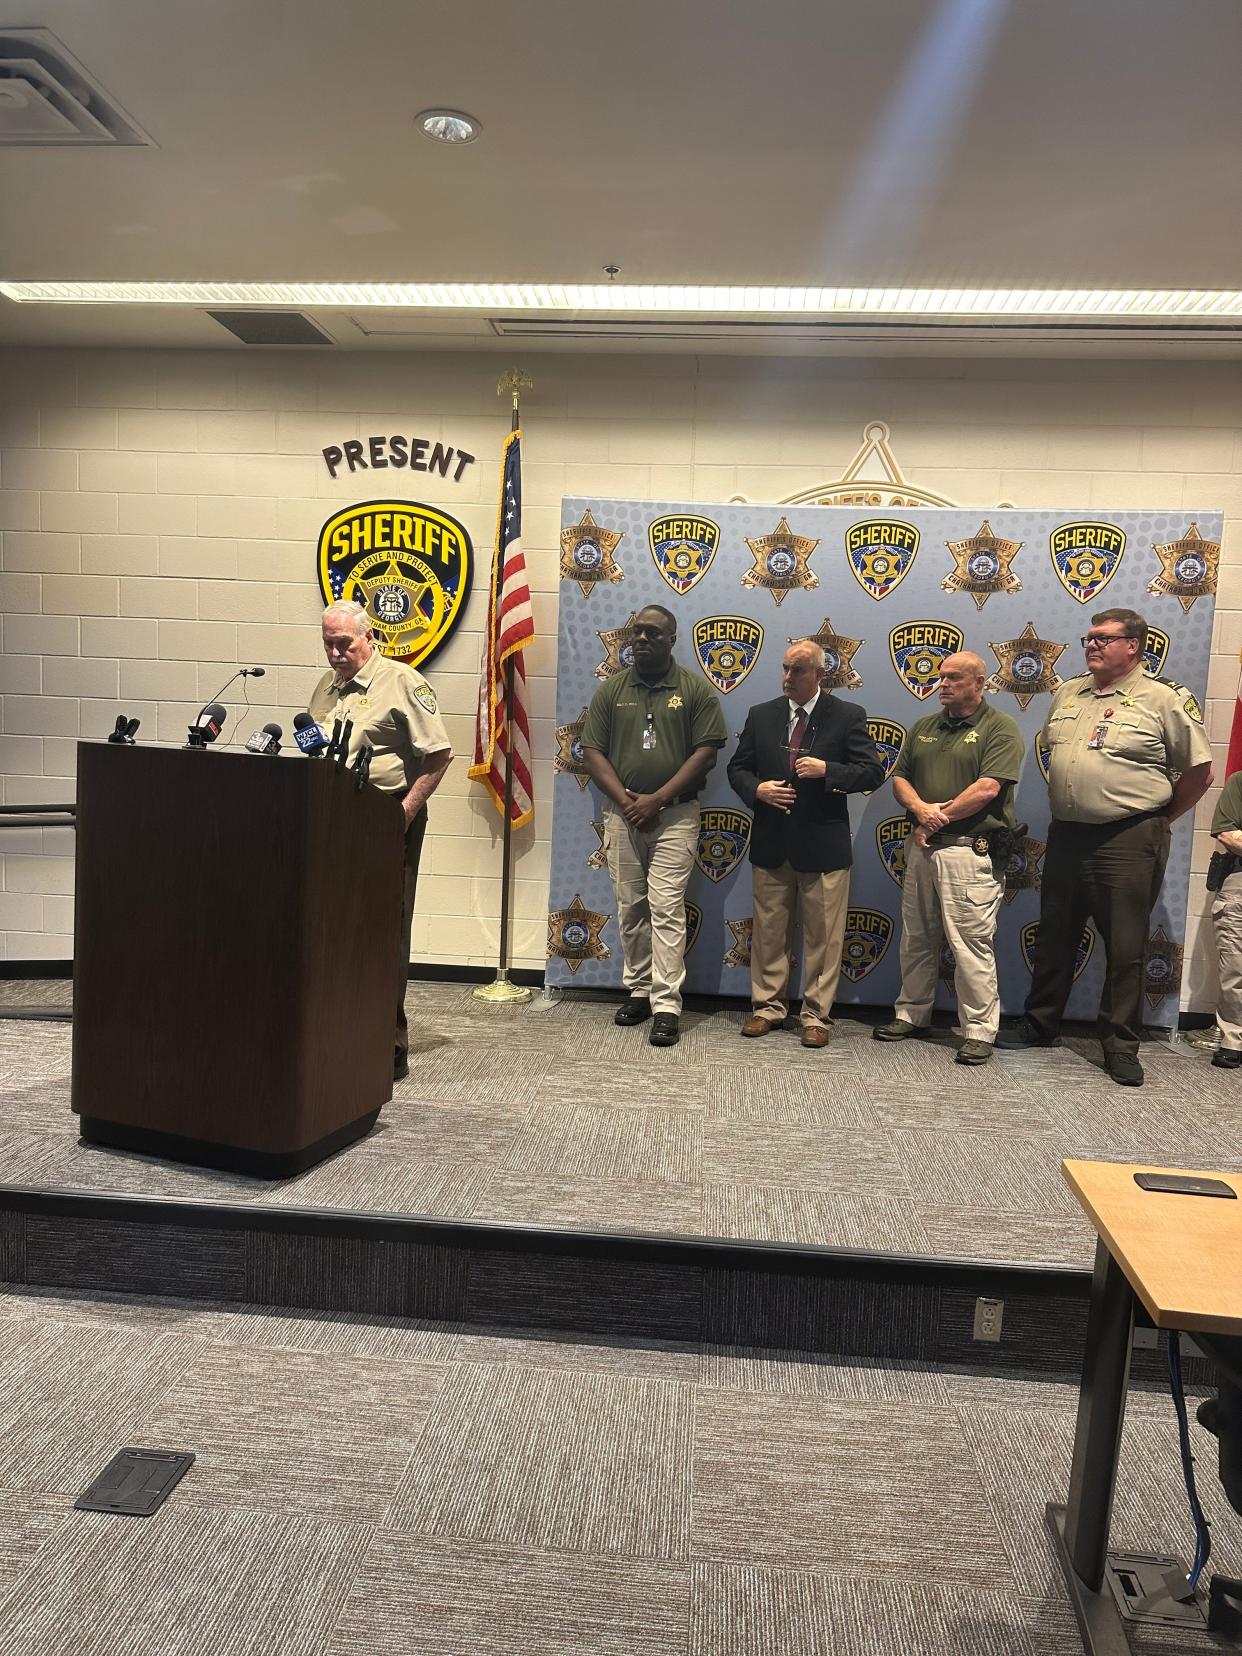 Chatham County Sheriff John Wilcher held a press conference on Tuesday afternoon to discuss the recent deaths at the Chatham County Jail.